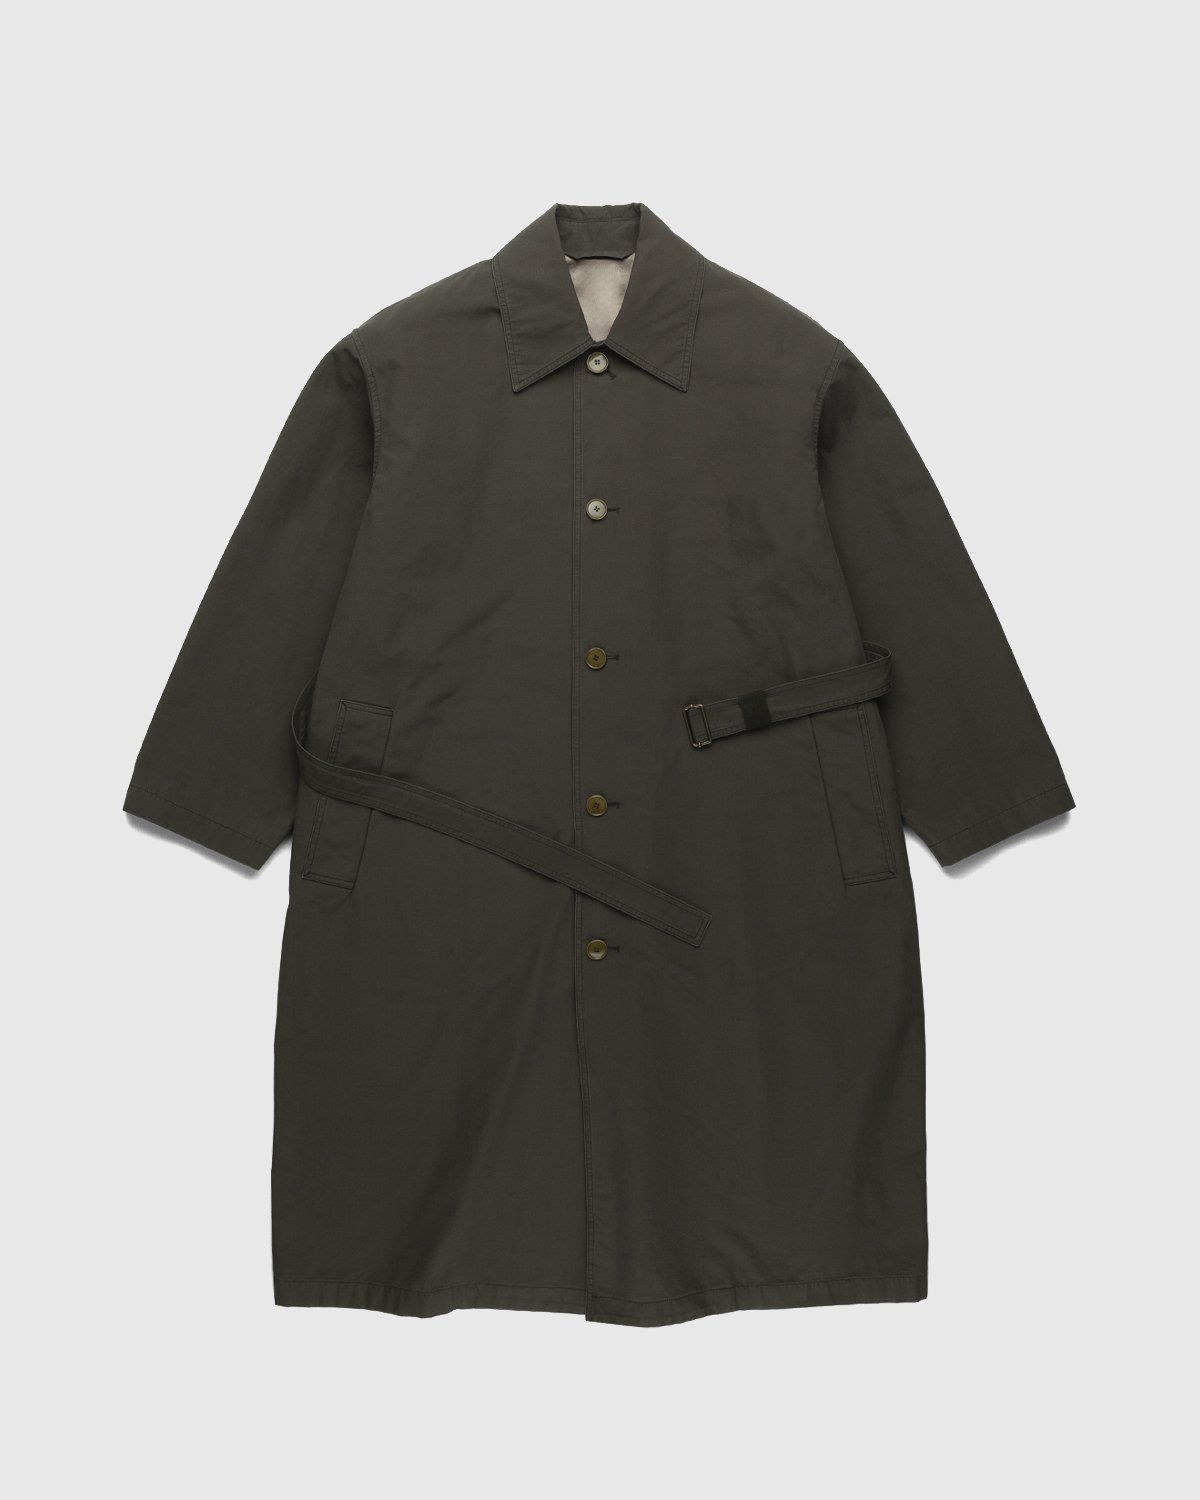 Acne Studios – Trench Coat Dark Olive - Outerwear - Green - Image 1